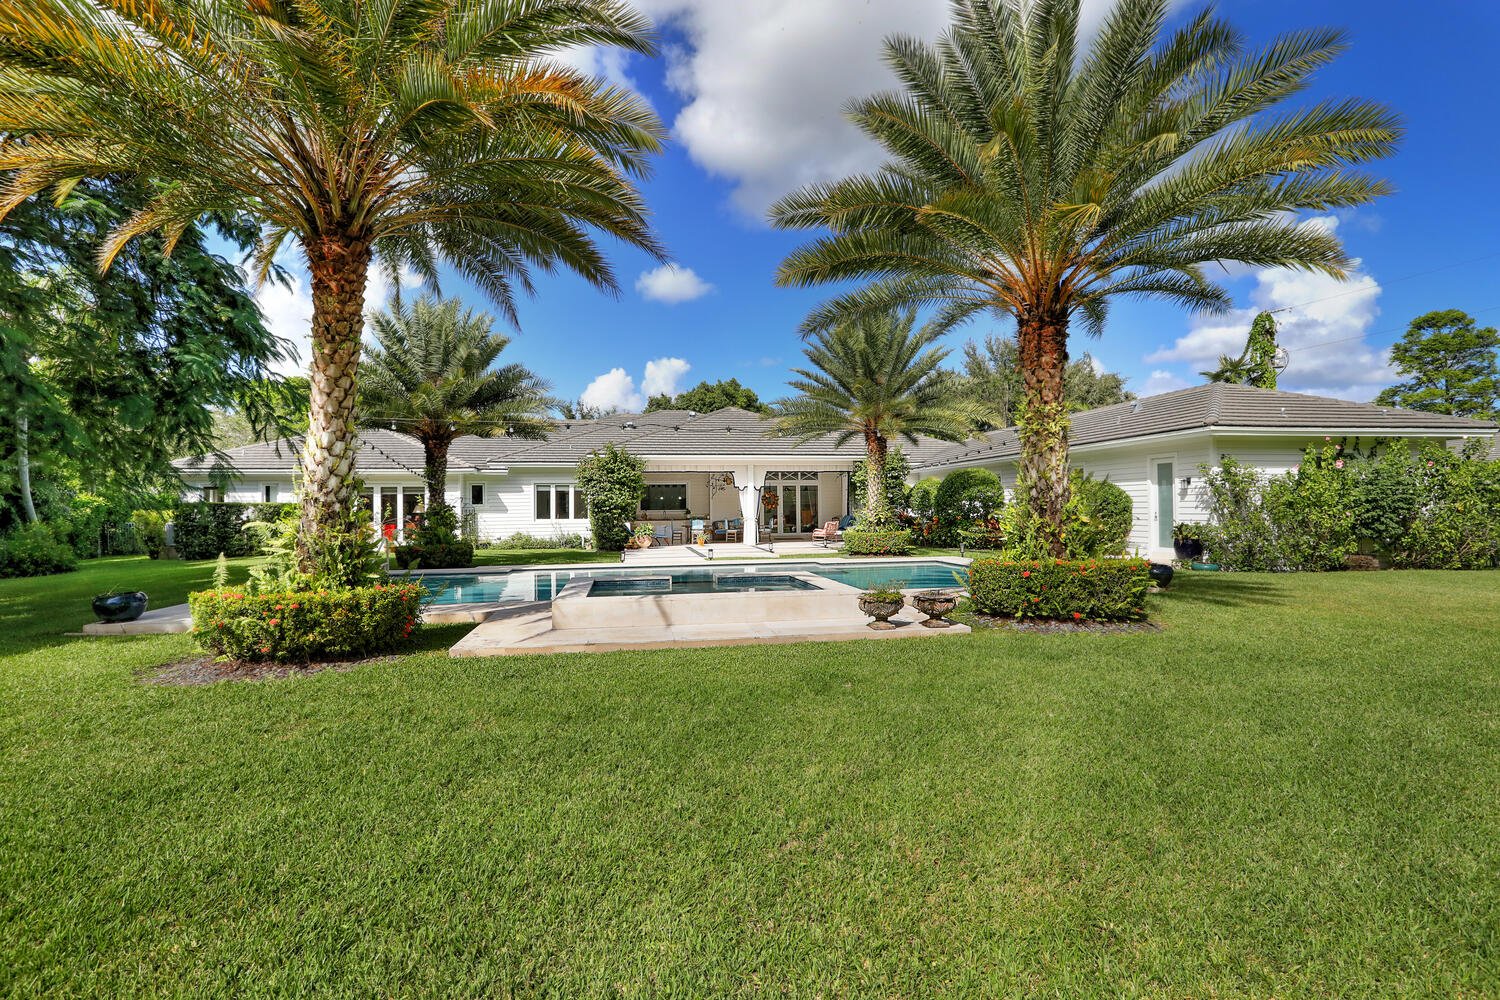 Master Brokers Forum Listing: Check Out This 'Hamptons Meets Key West' Style North Pinecrest Home Asking $5.8 Million 18.jpg